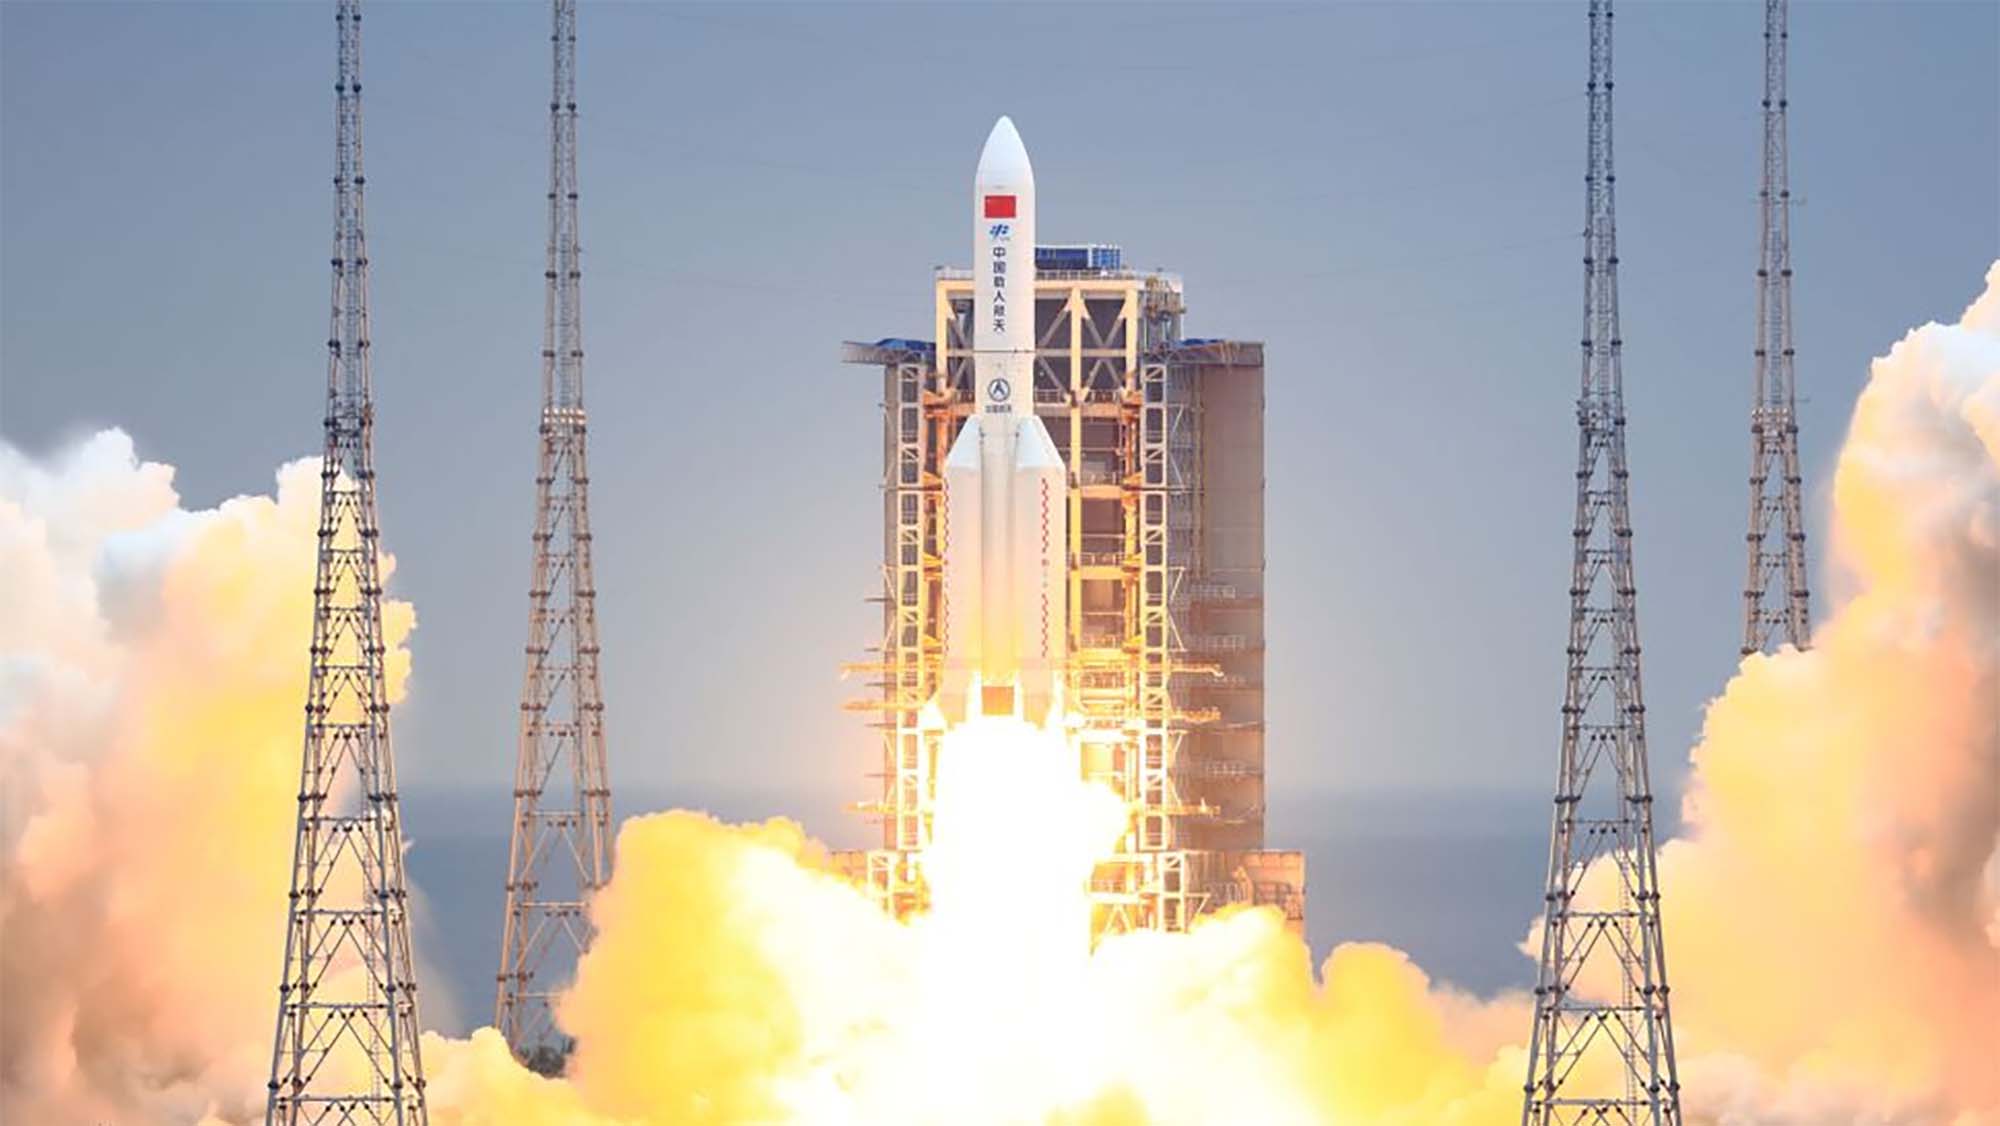 A Chinese rocket lifting off from the Wenchang Spacecraft Launch Site in Hainan province, China